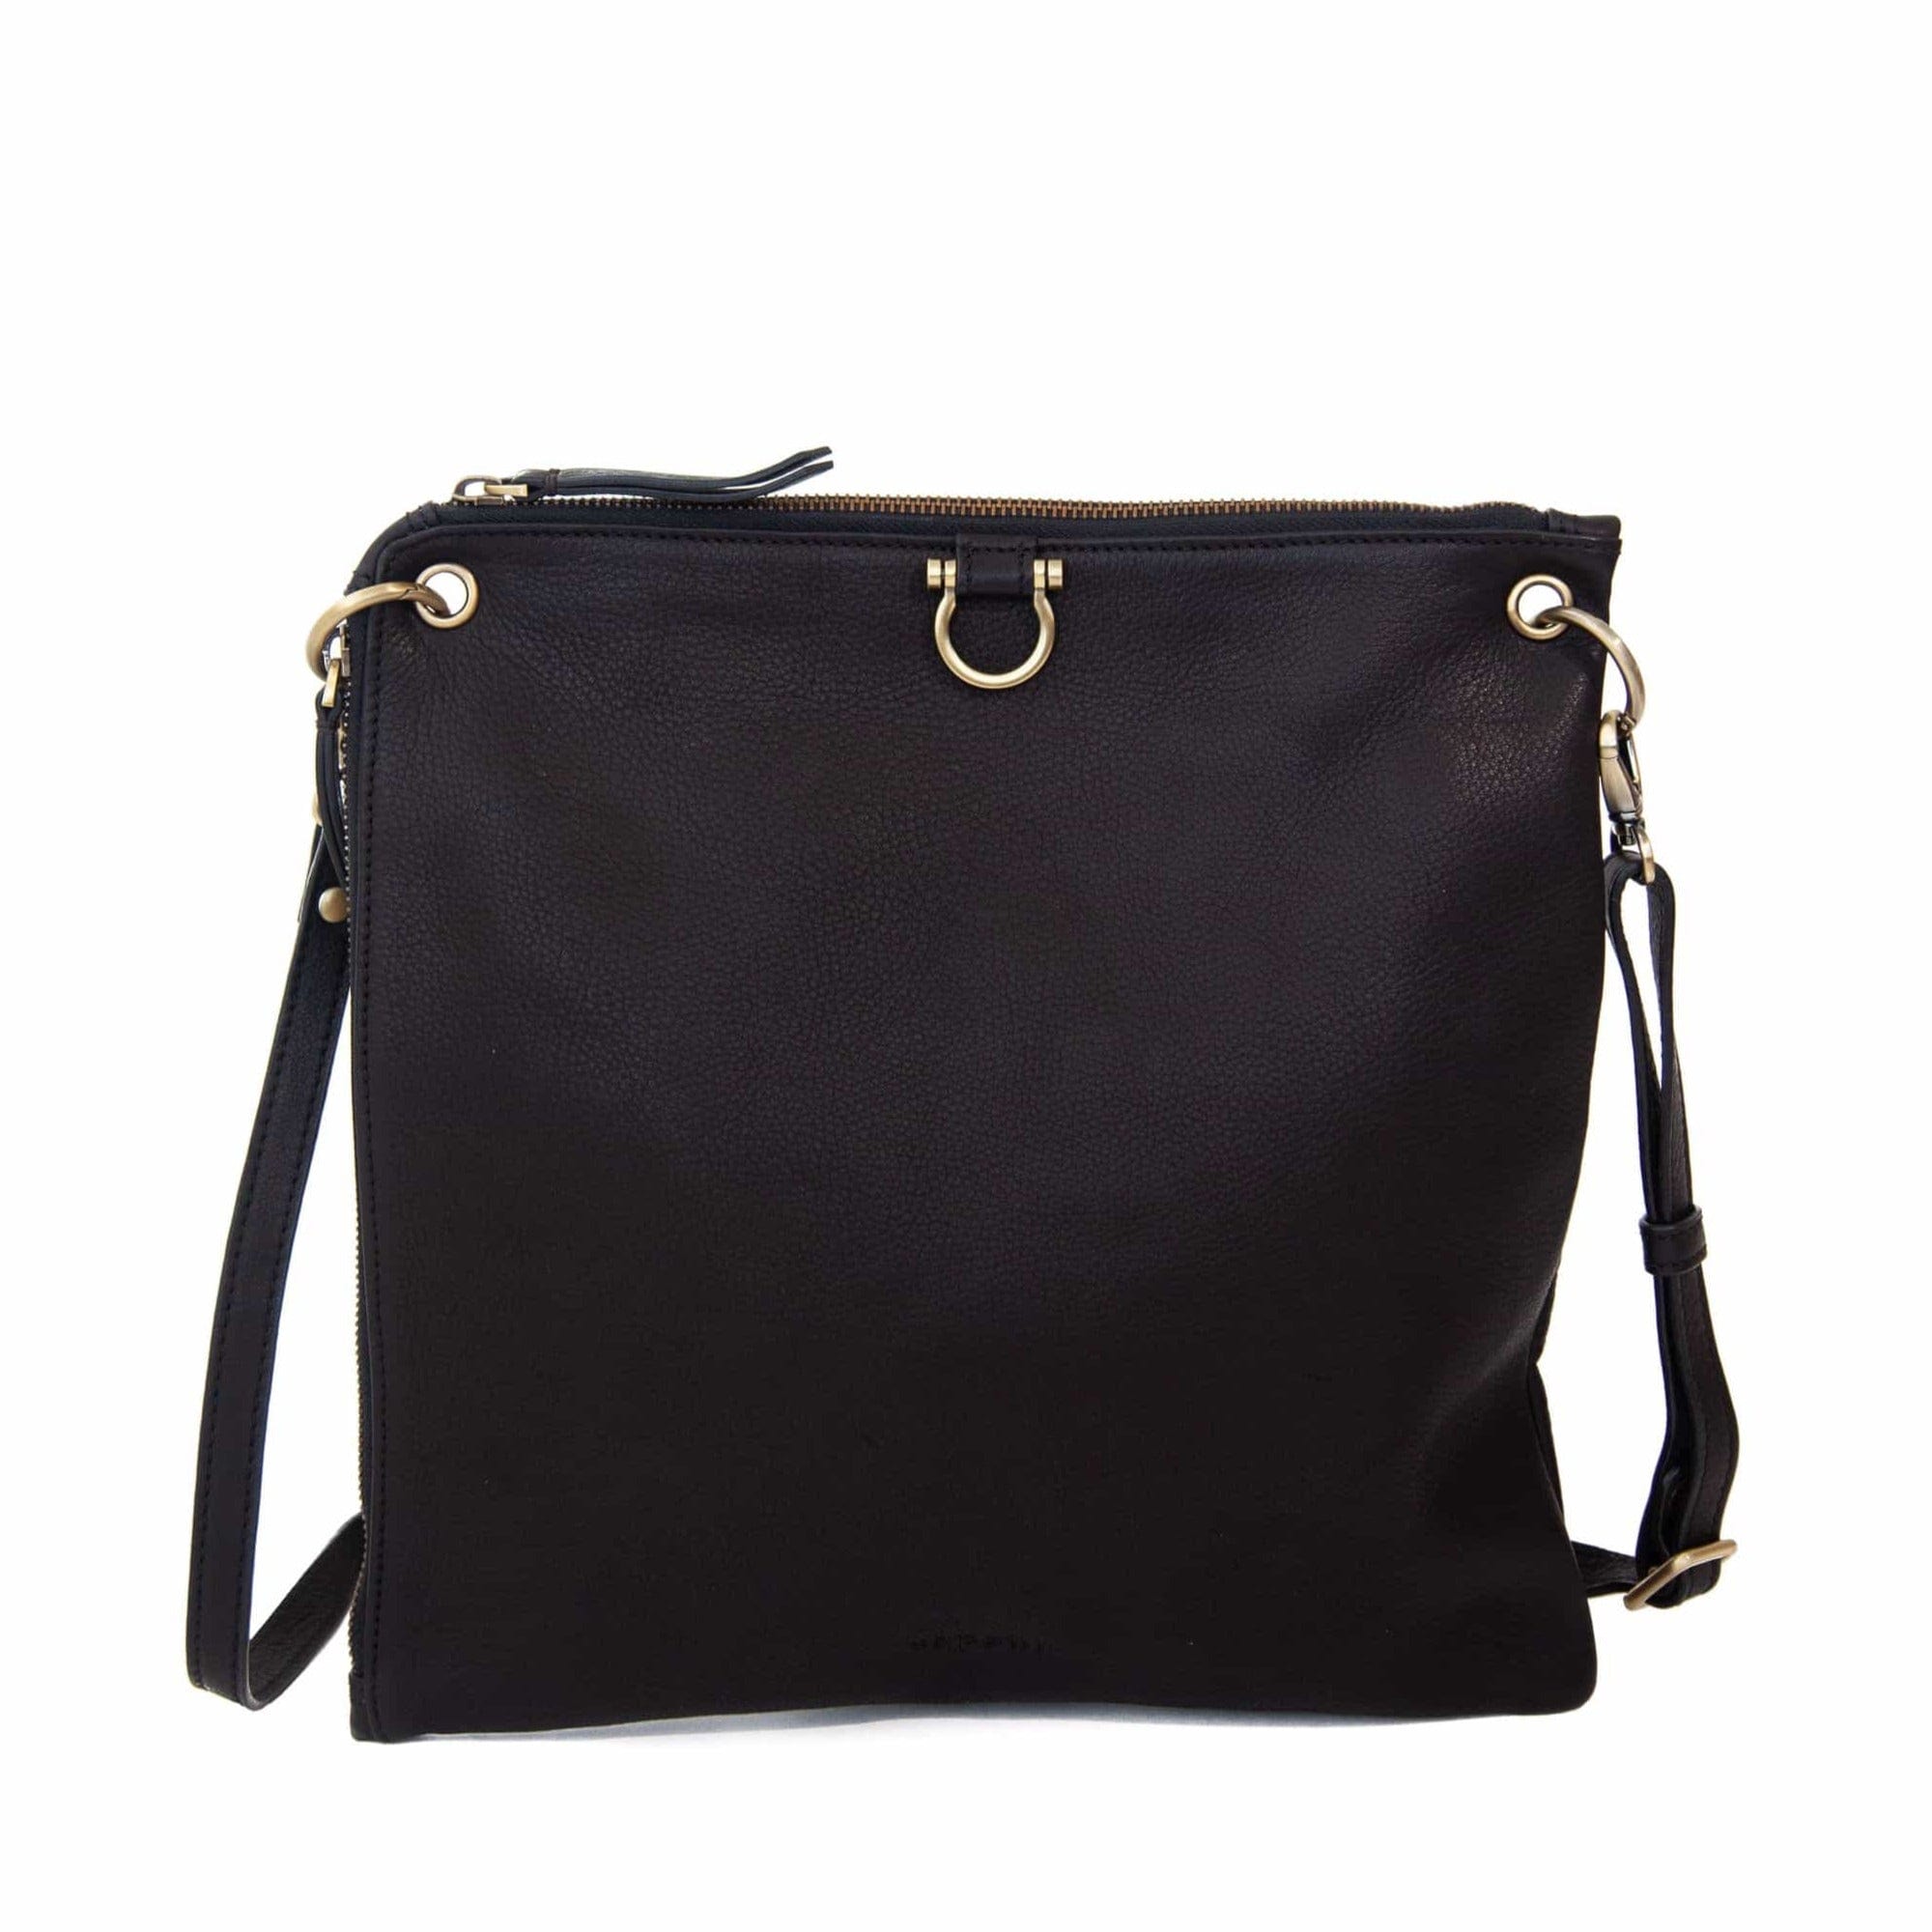 The Rin crossbody bag in black raw leather has Omega brass hardware.